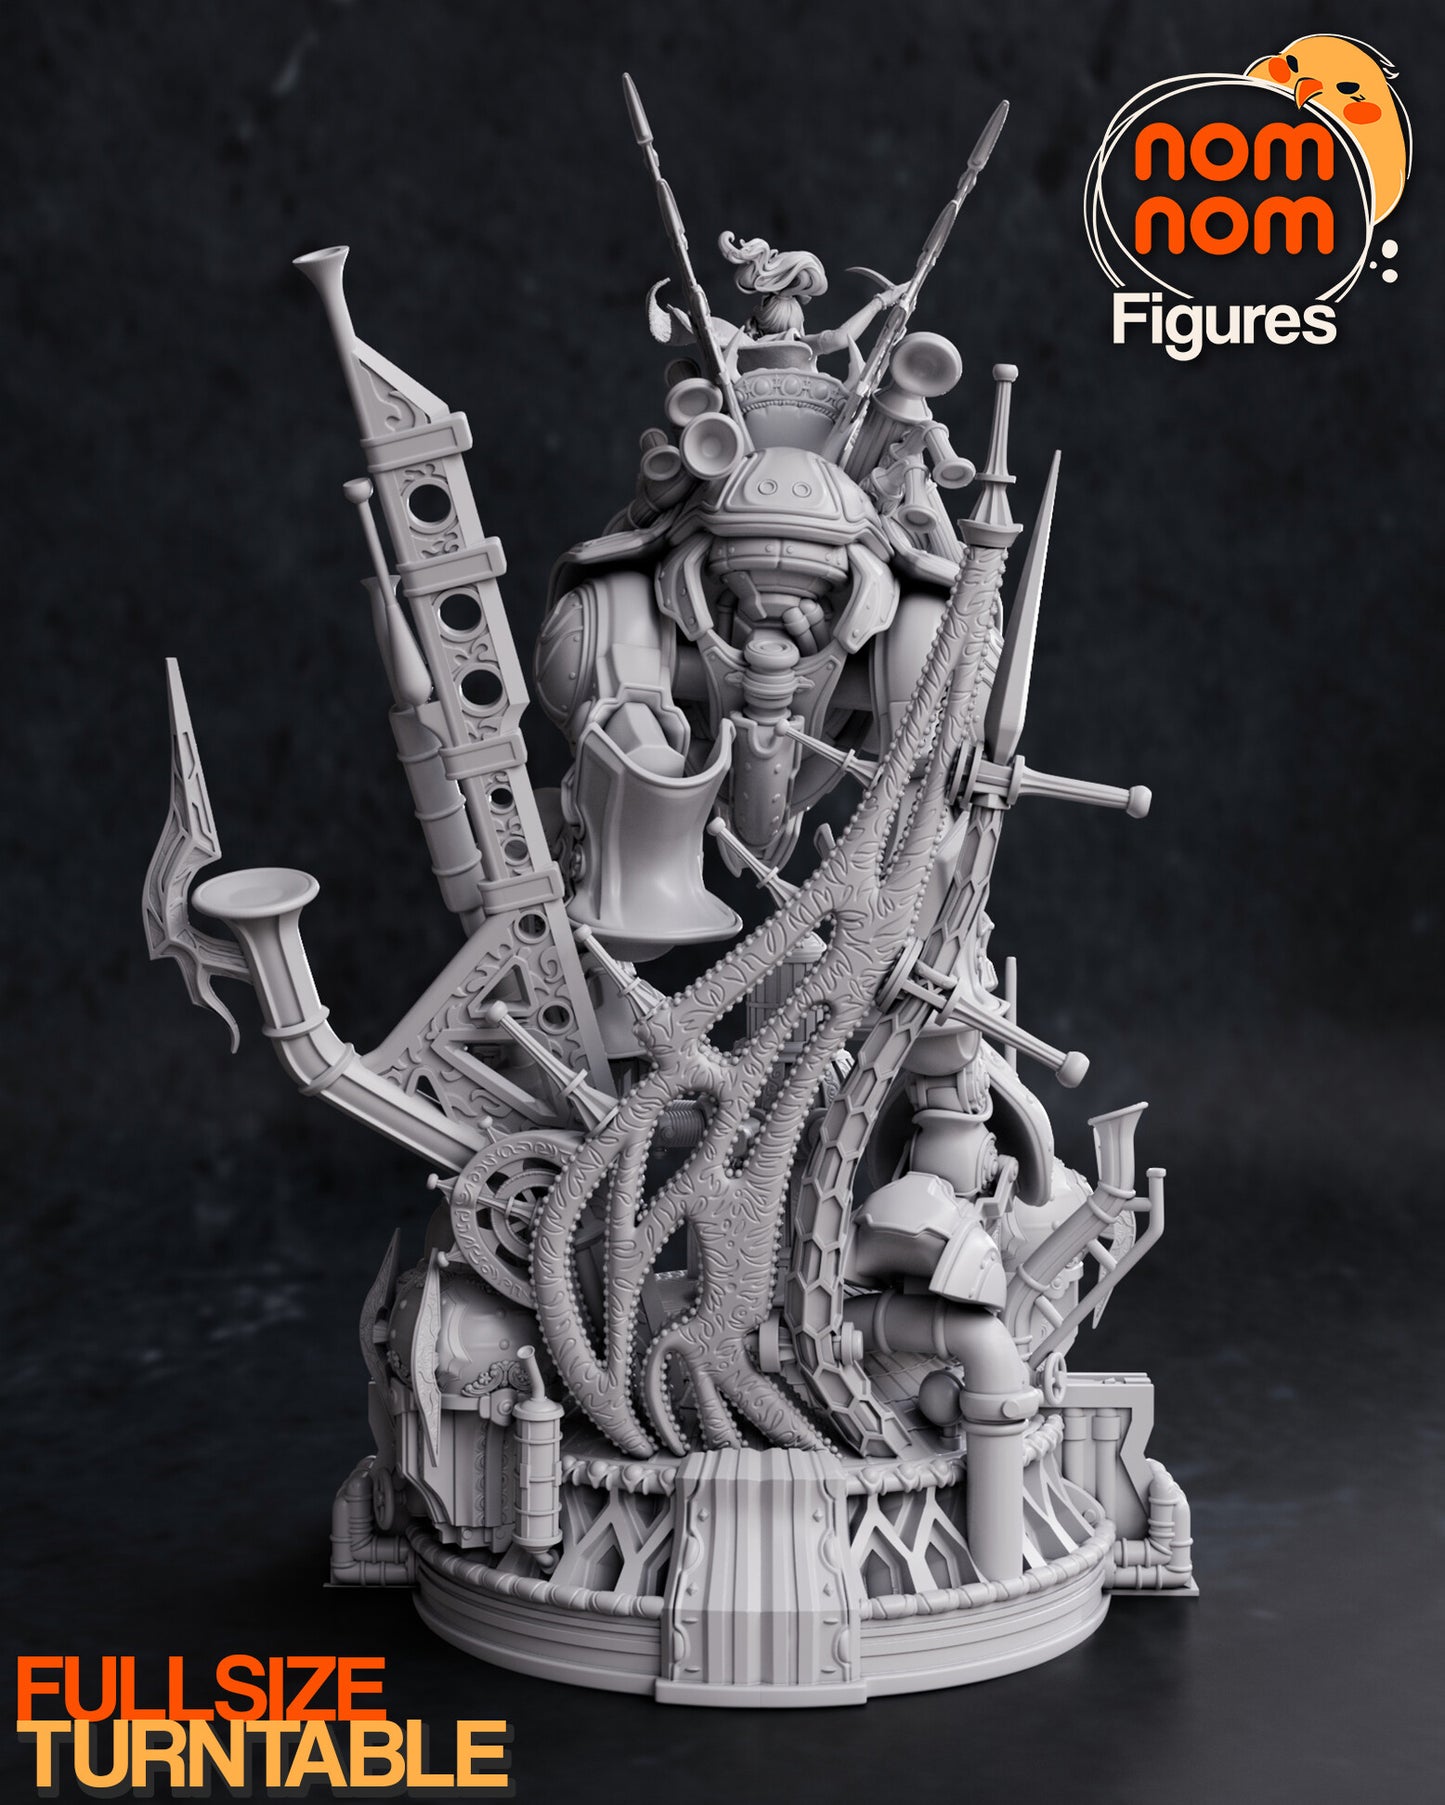 Terra with Magitek from Final Fantasy 3D Printed Fanmade Model by Nomnom Figures